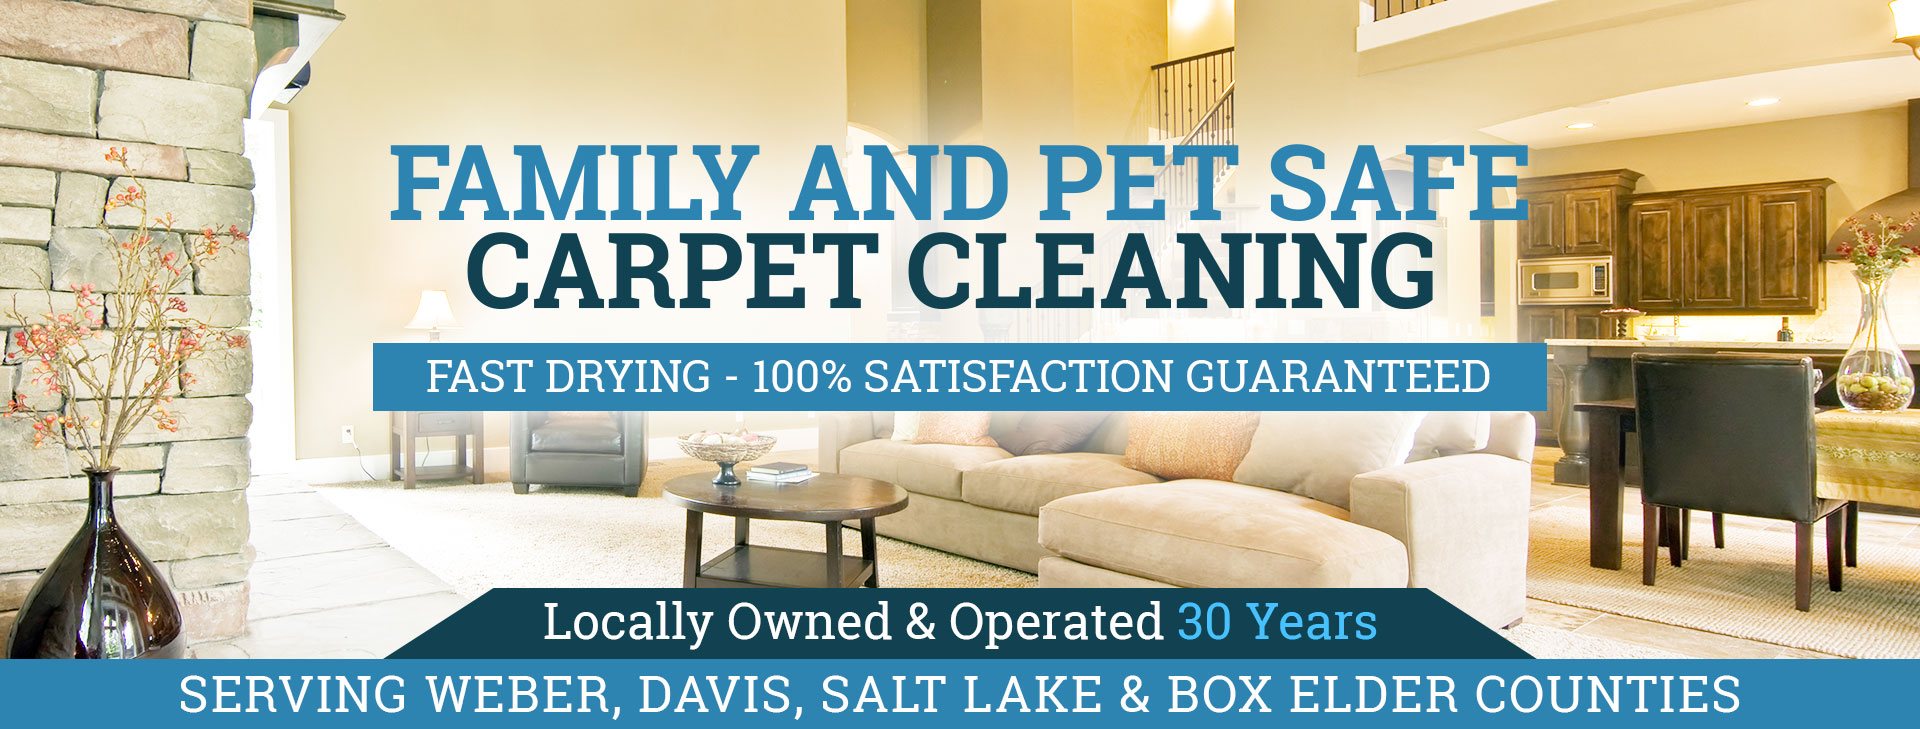 Family and Pet Safe Carpet Cleaning in Ogden UT